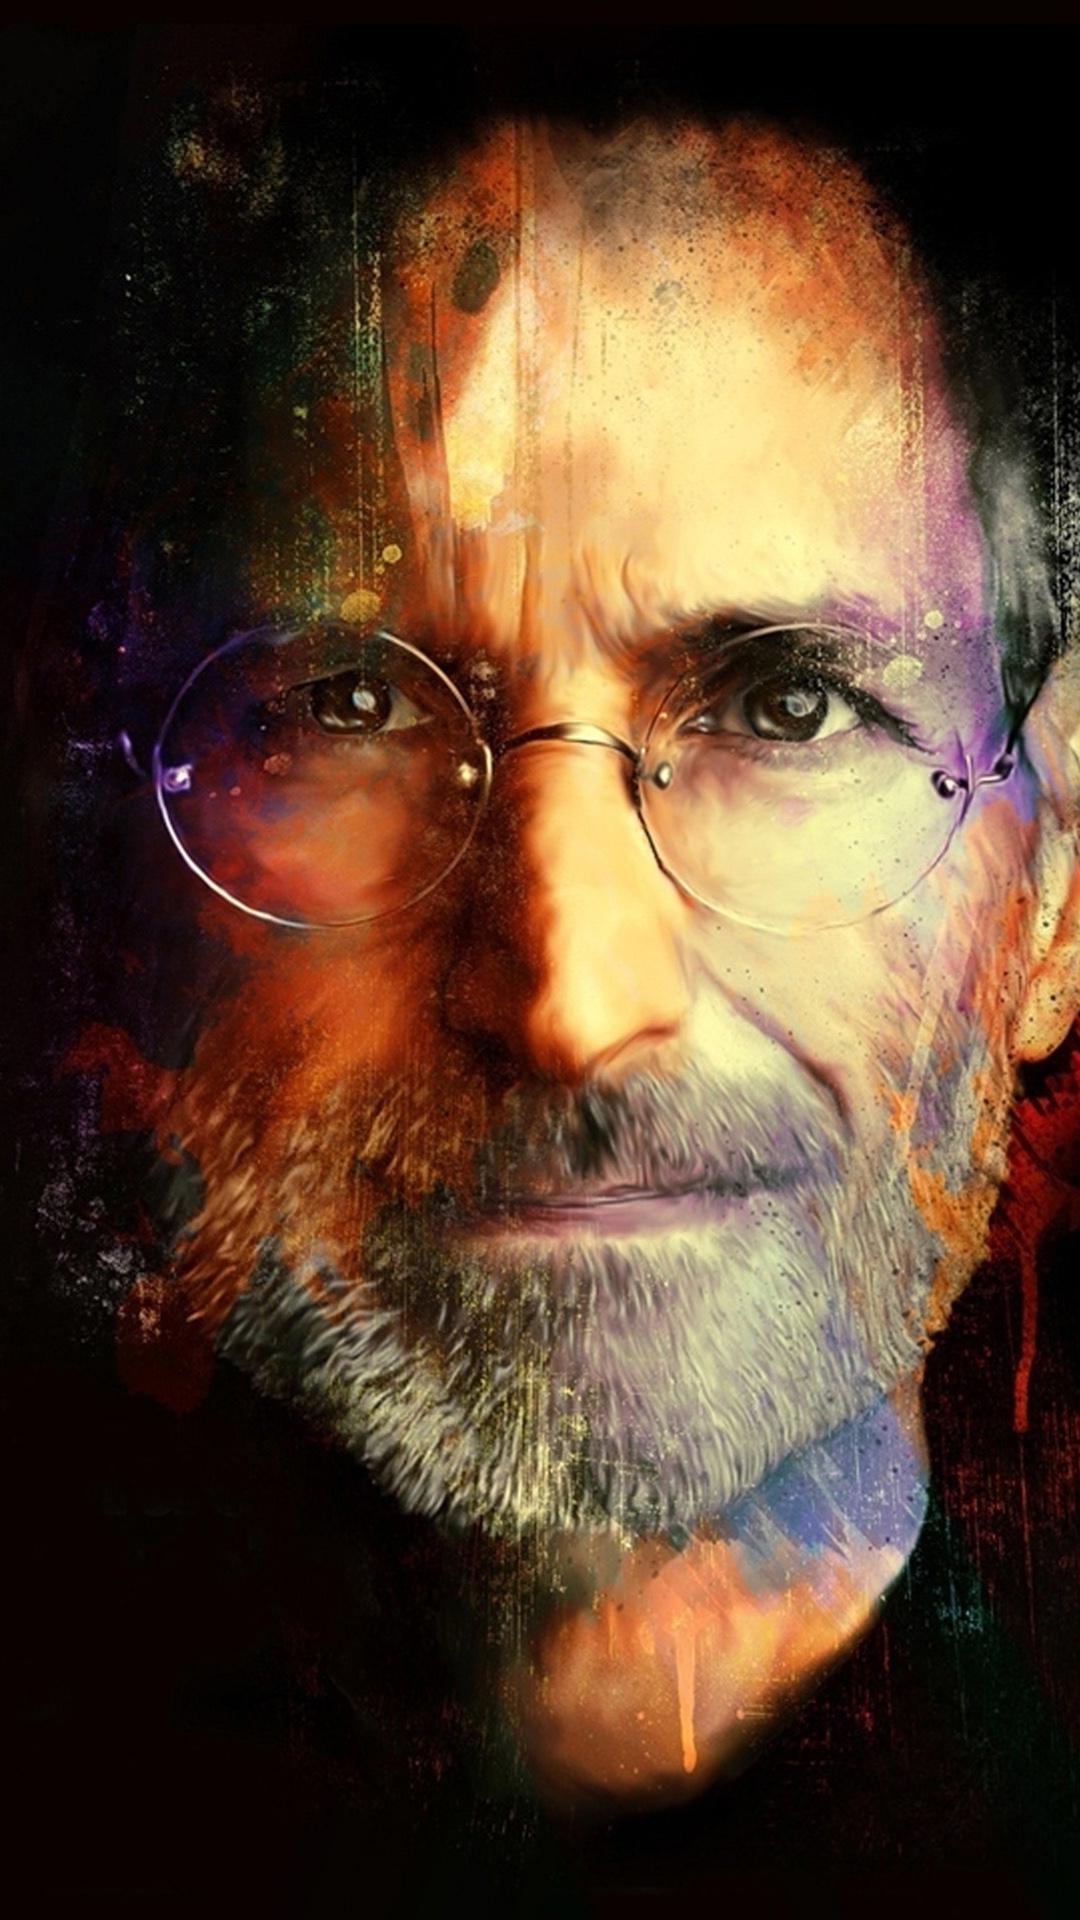 Steve Jobs tribute wallpaper for iPhone 6 and iPhone 6 Plus